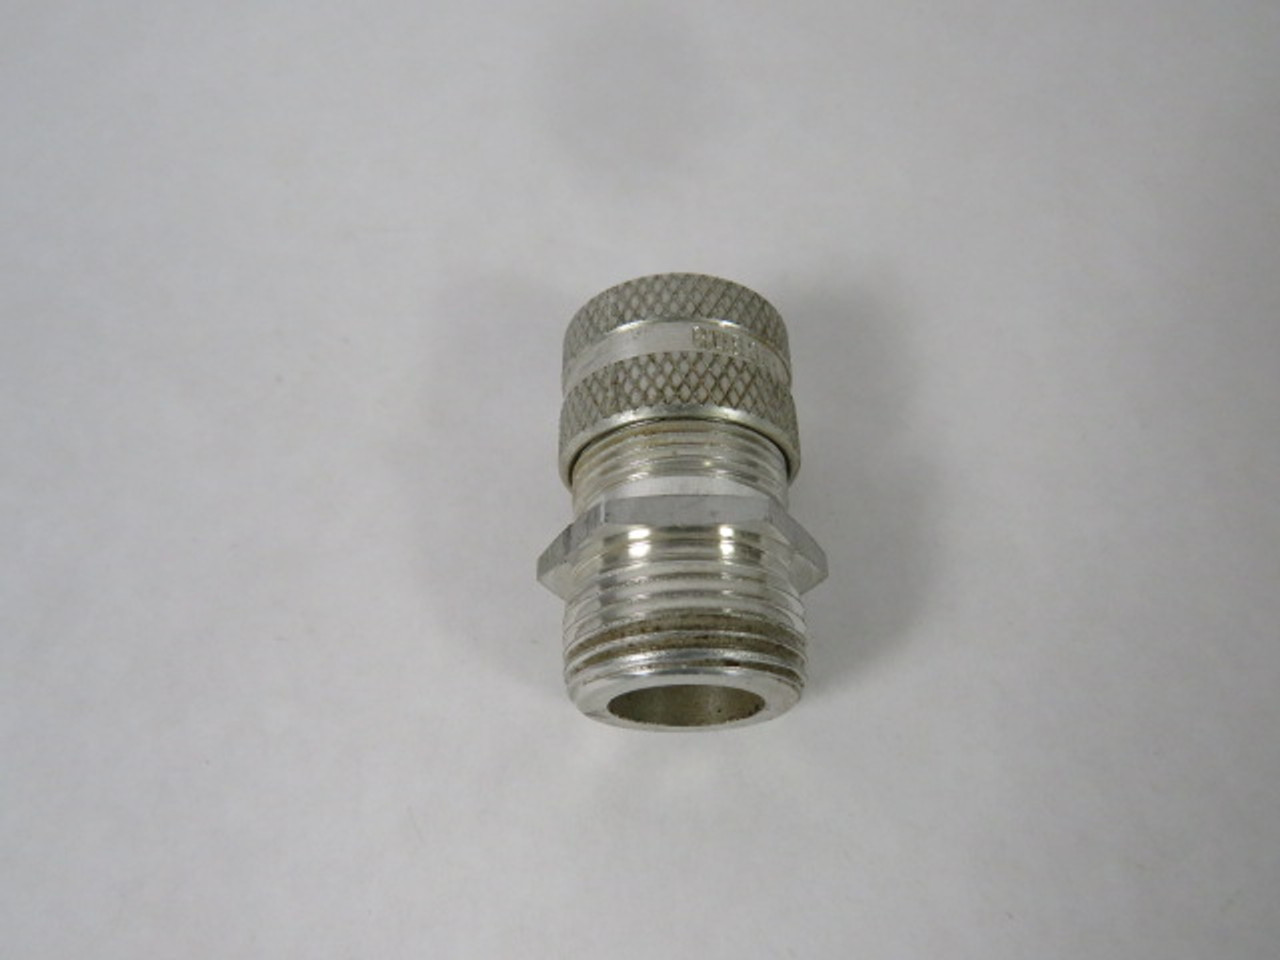 Hubbell SHC1033 3/4"NPT Cord Connector Aluminum USED